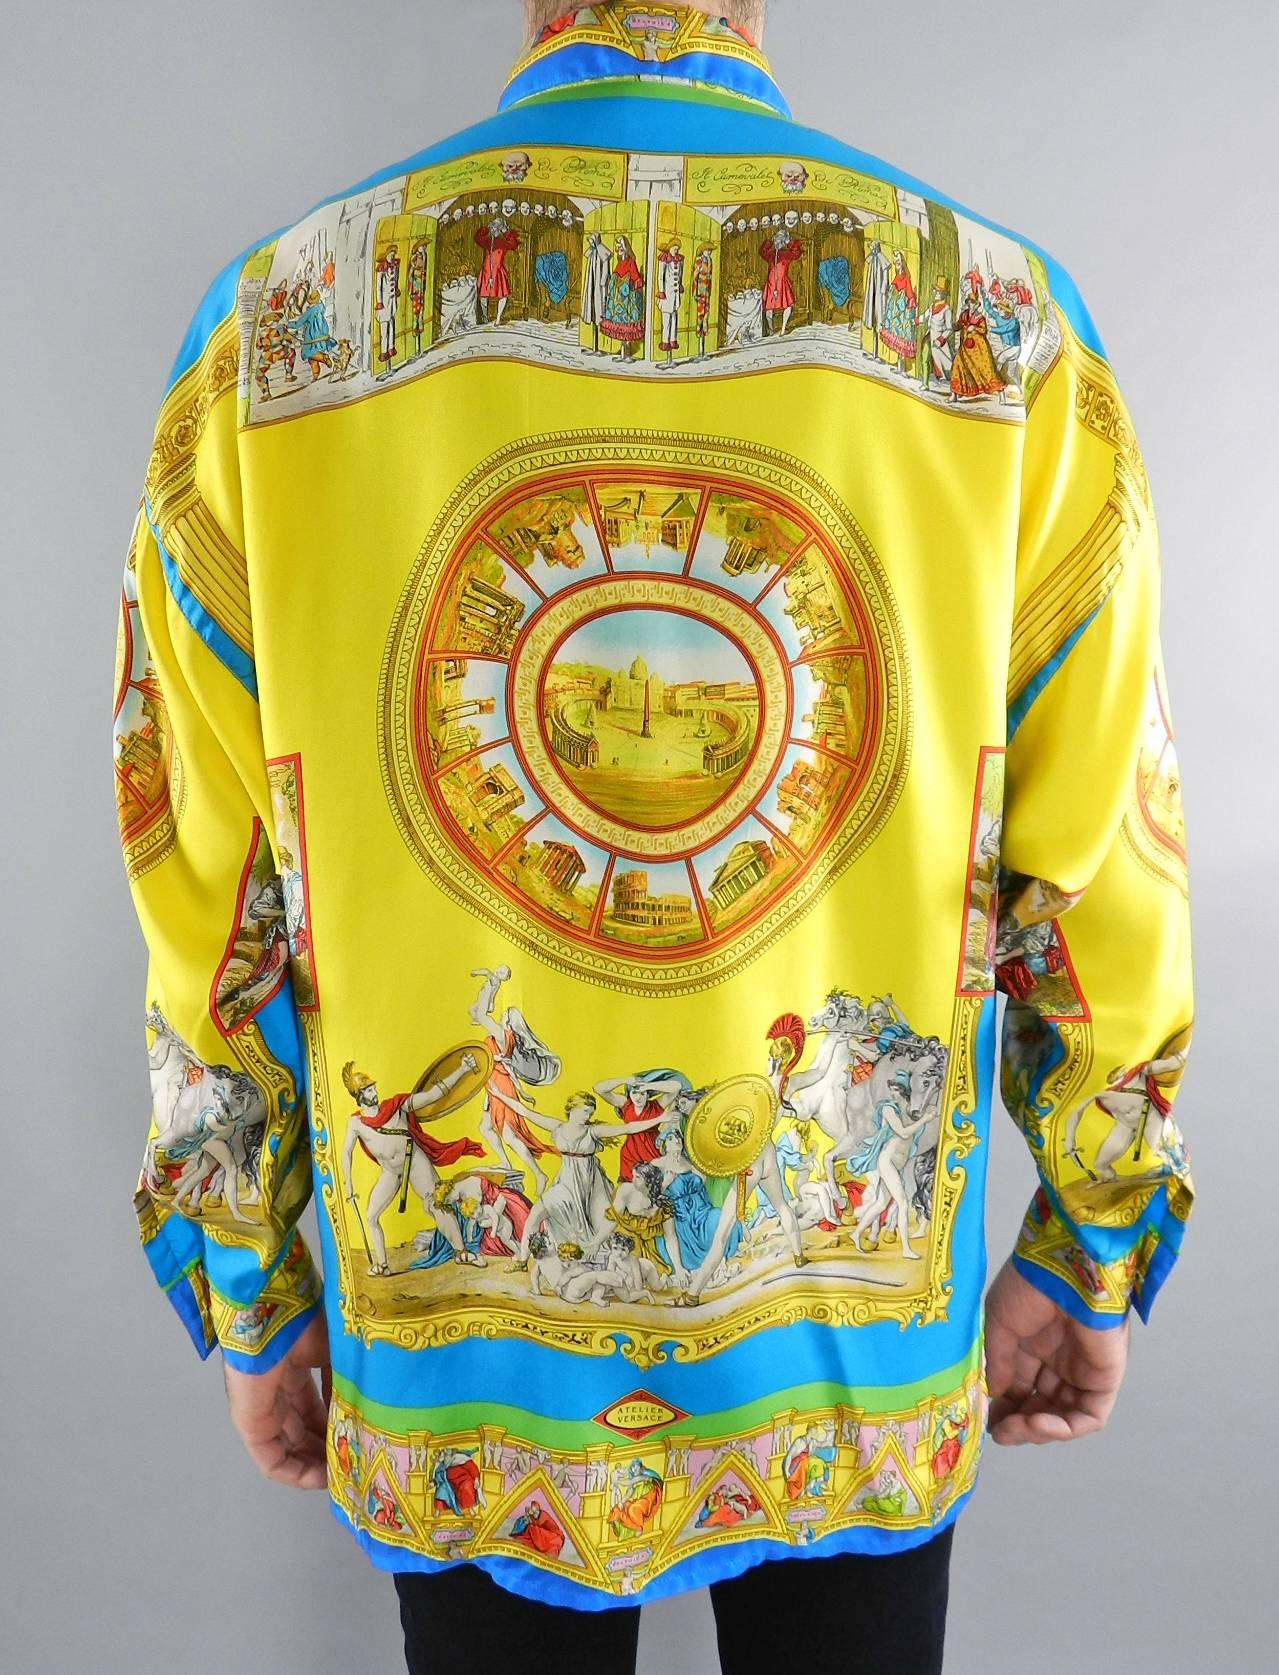 Gianni Versace / Atelier Versace 1993 men's silk printed shirt.  Renaissance  / Rome design with Classical buildings, Michelangelo, and Roman scenes. Main colors are bright yellow, turquoise, blue, green. Tagged size 48 (USA S/M). 25